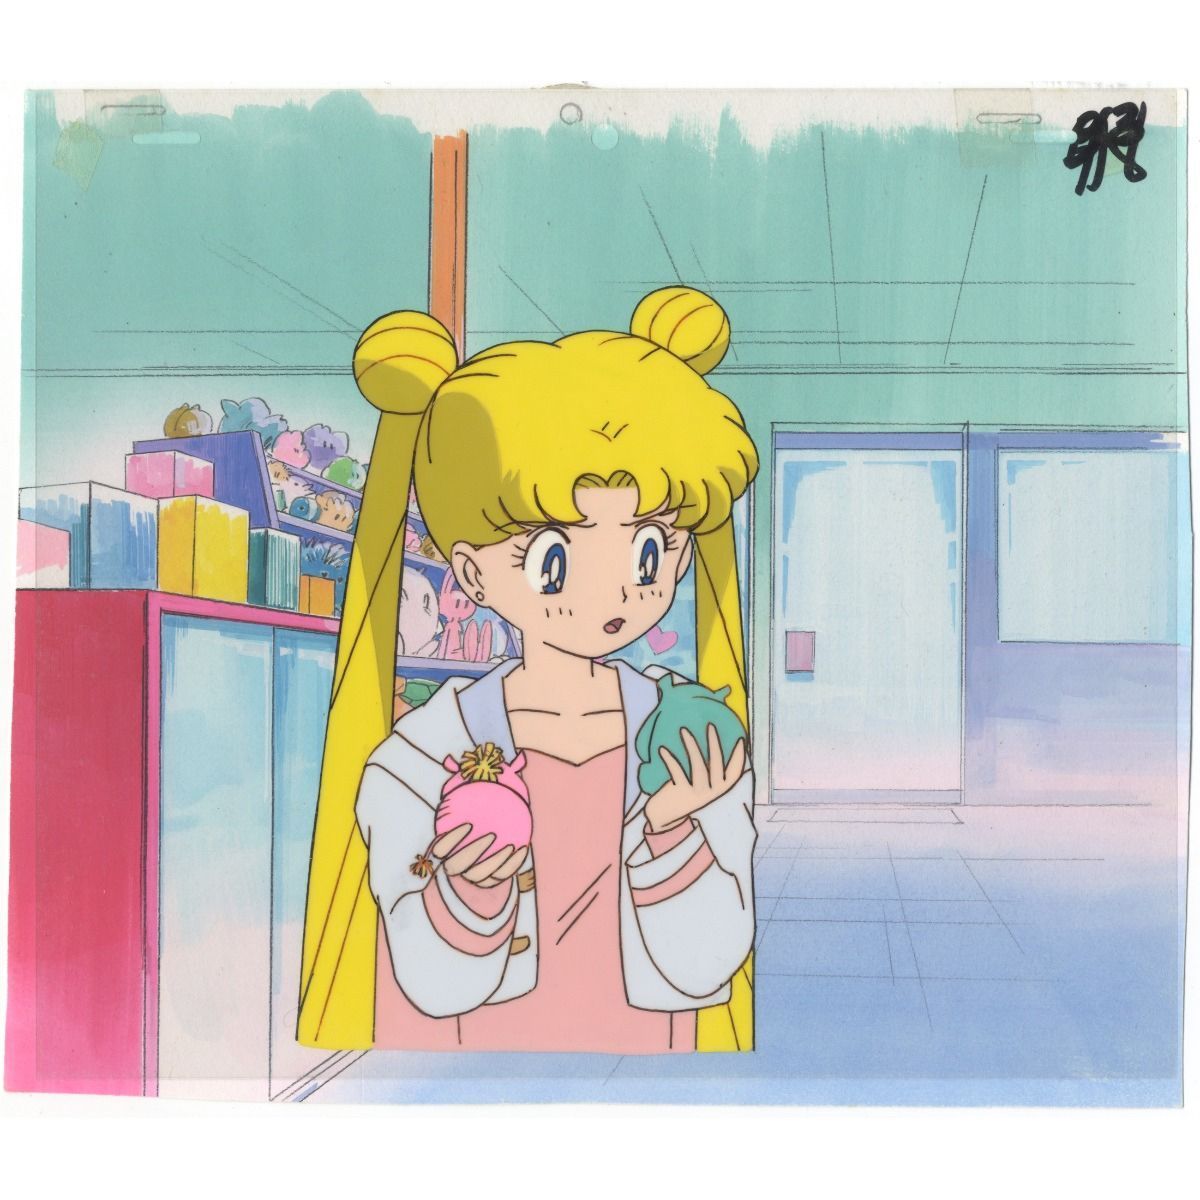 Usagi holding two transformation items, one pink and one green, in front of a store. - Sailor Moon